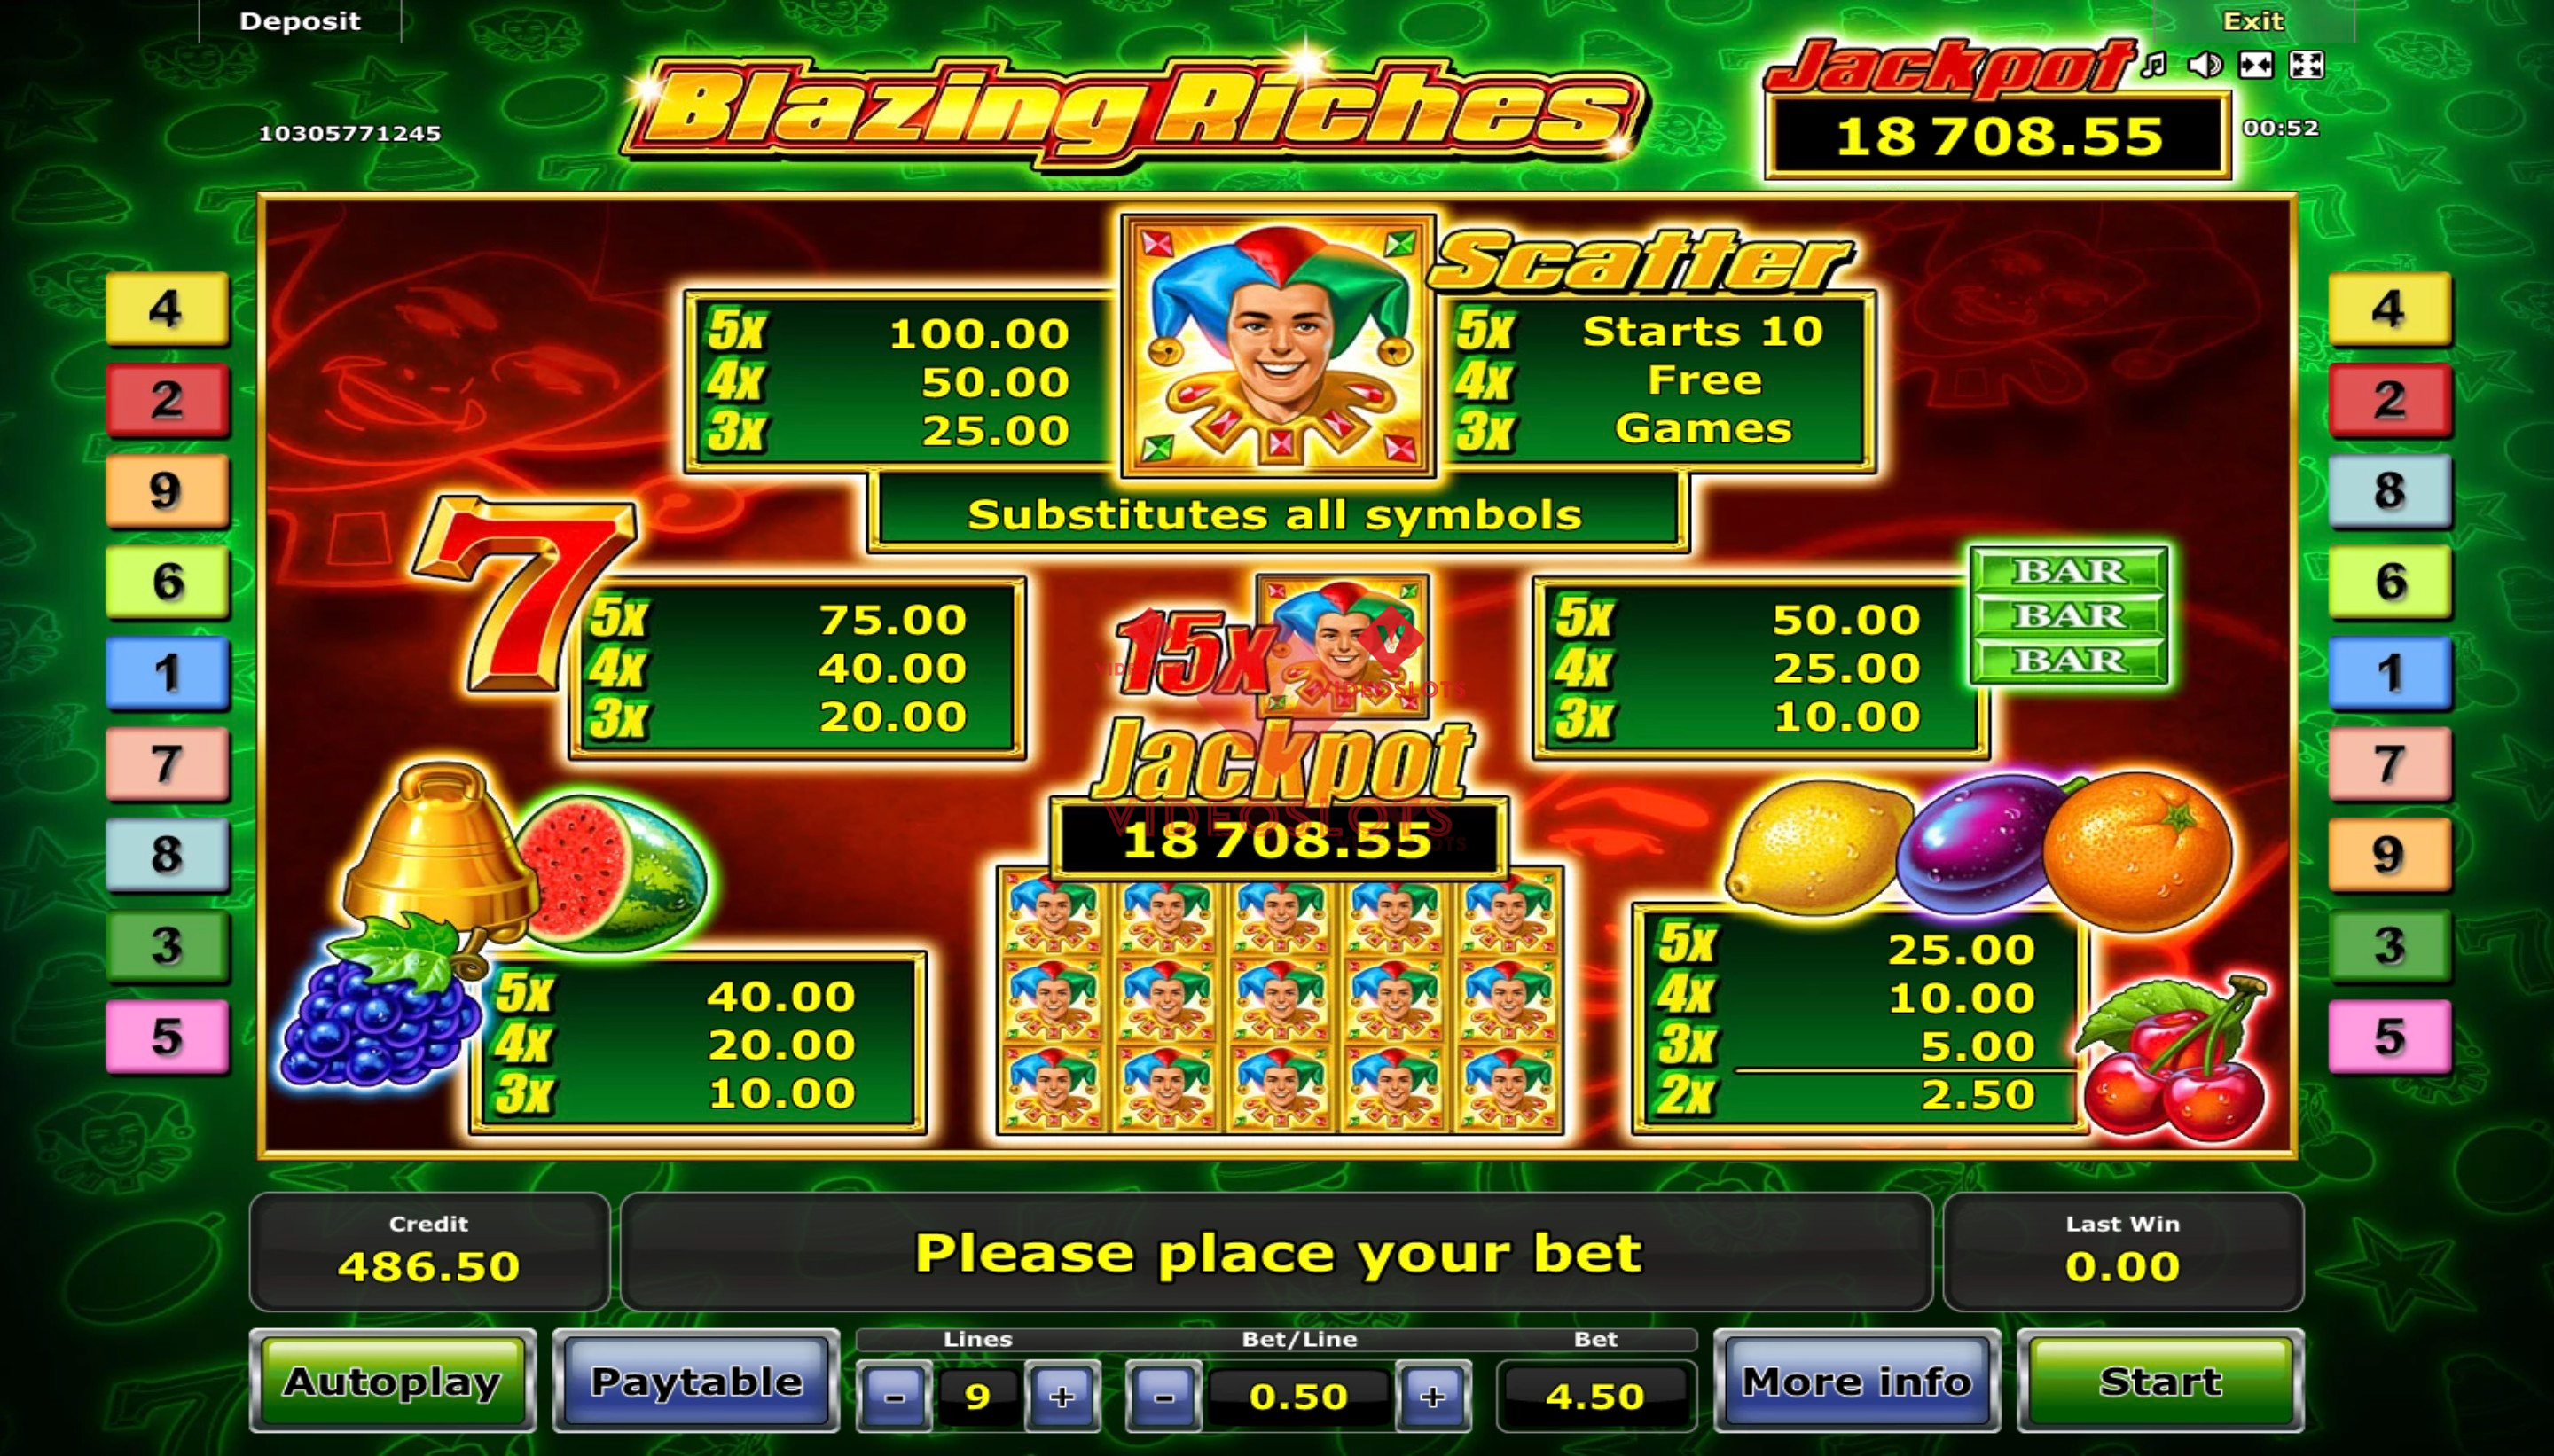 Pay Table for Blazing Riches slot from Greentube